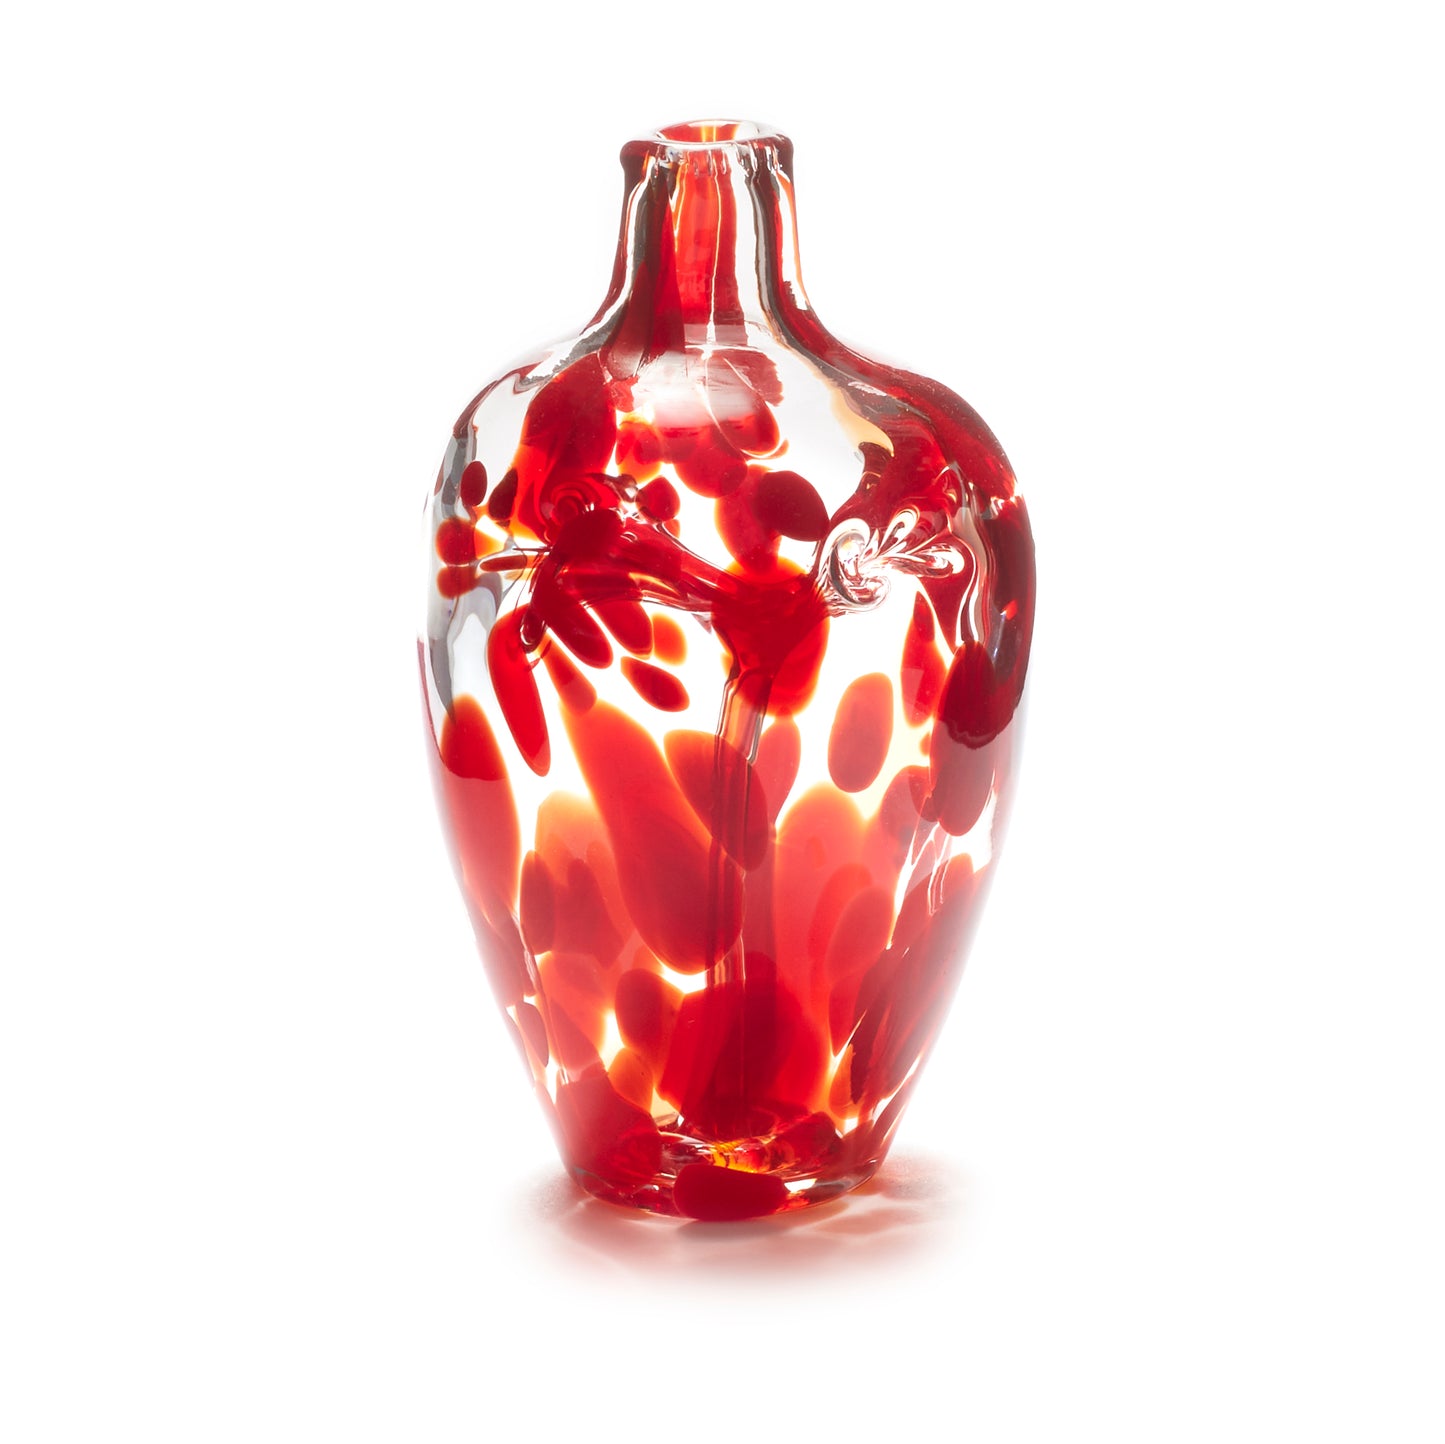 Miniature hand blown glass vase. Ruby red glass.